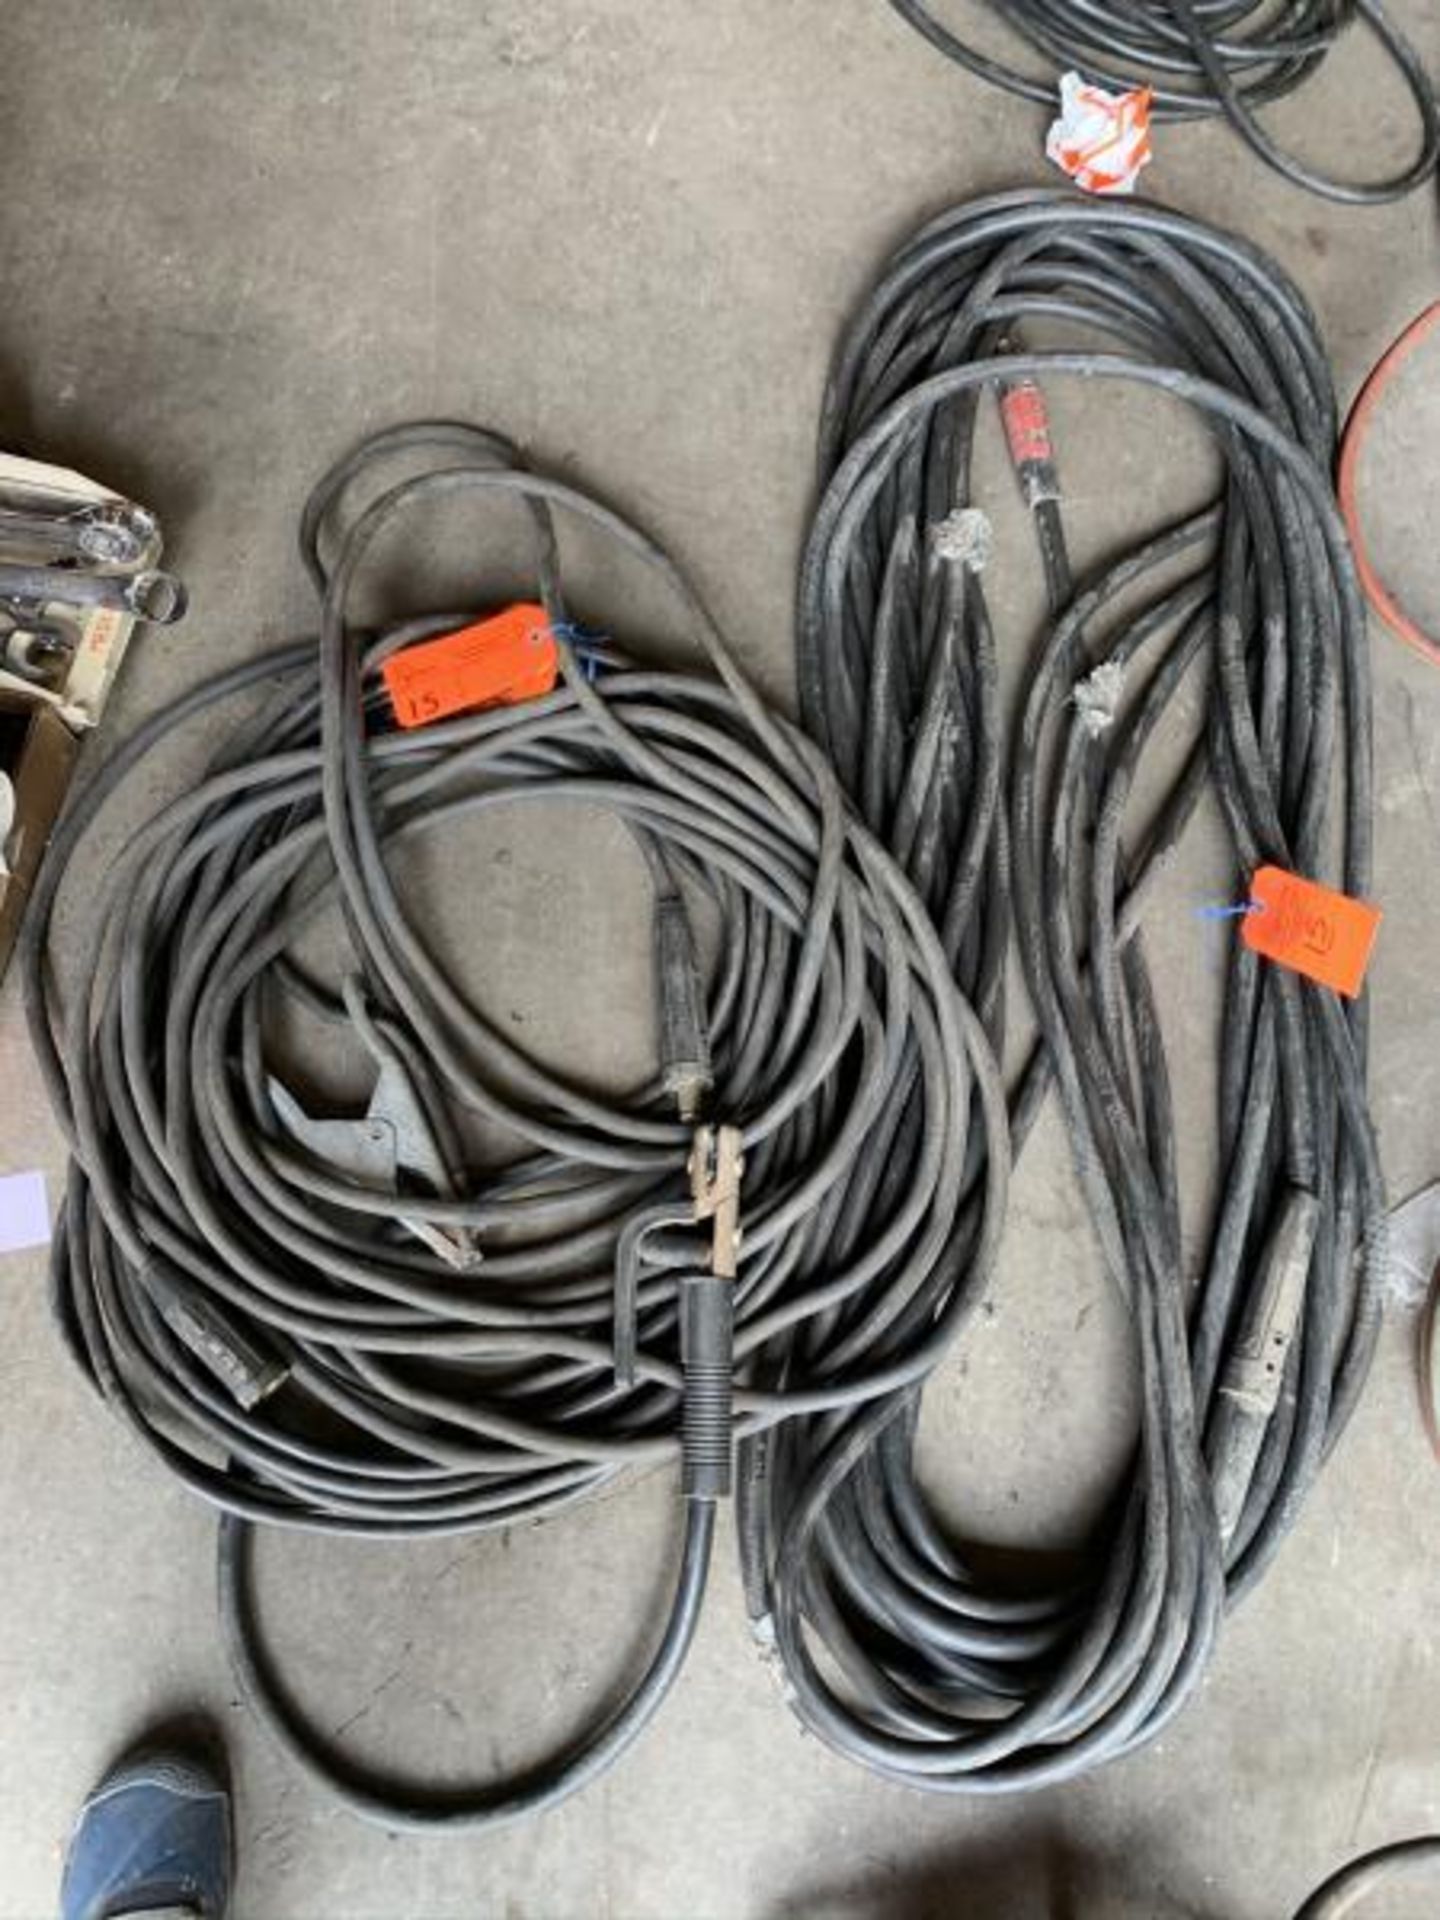 (2) 50' Arcf Welding cables